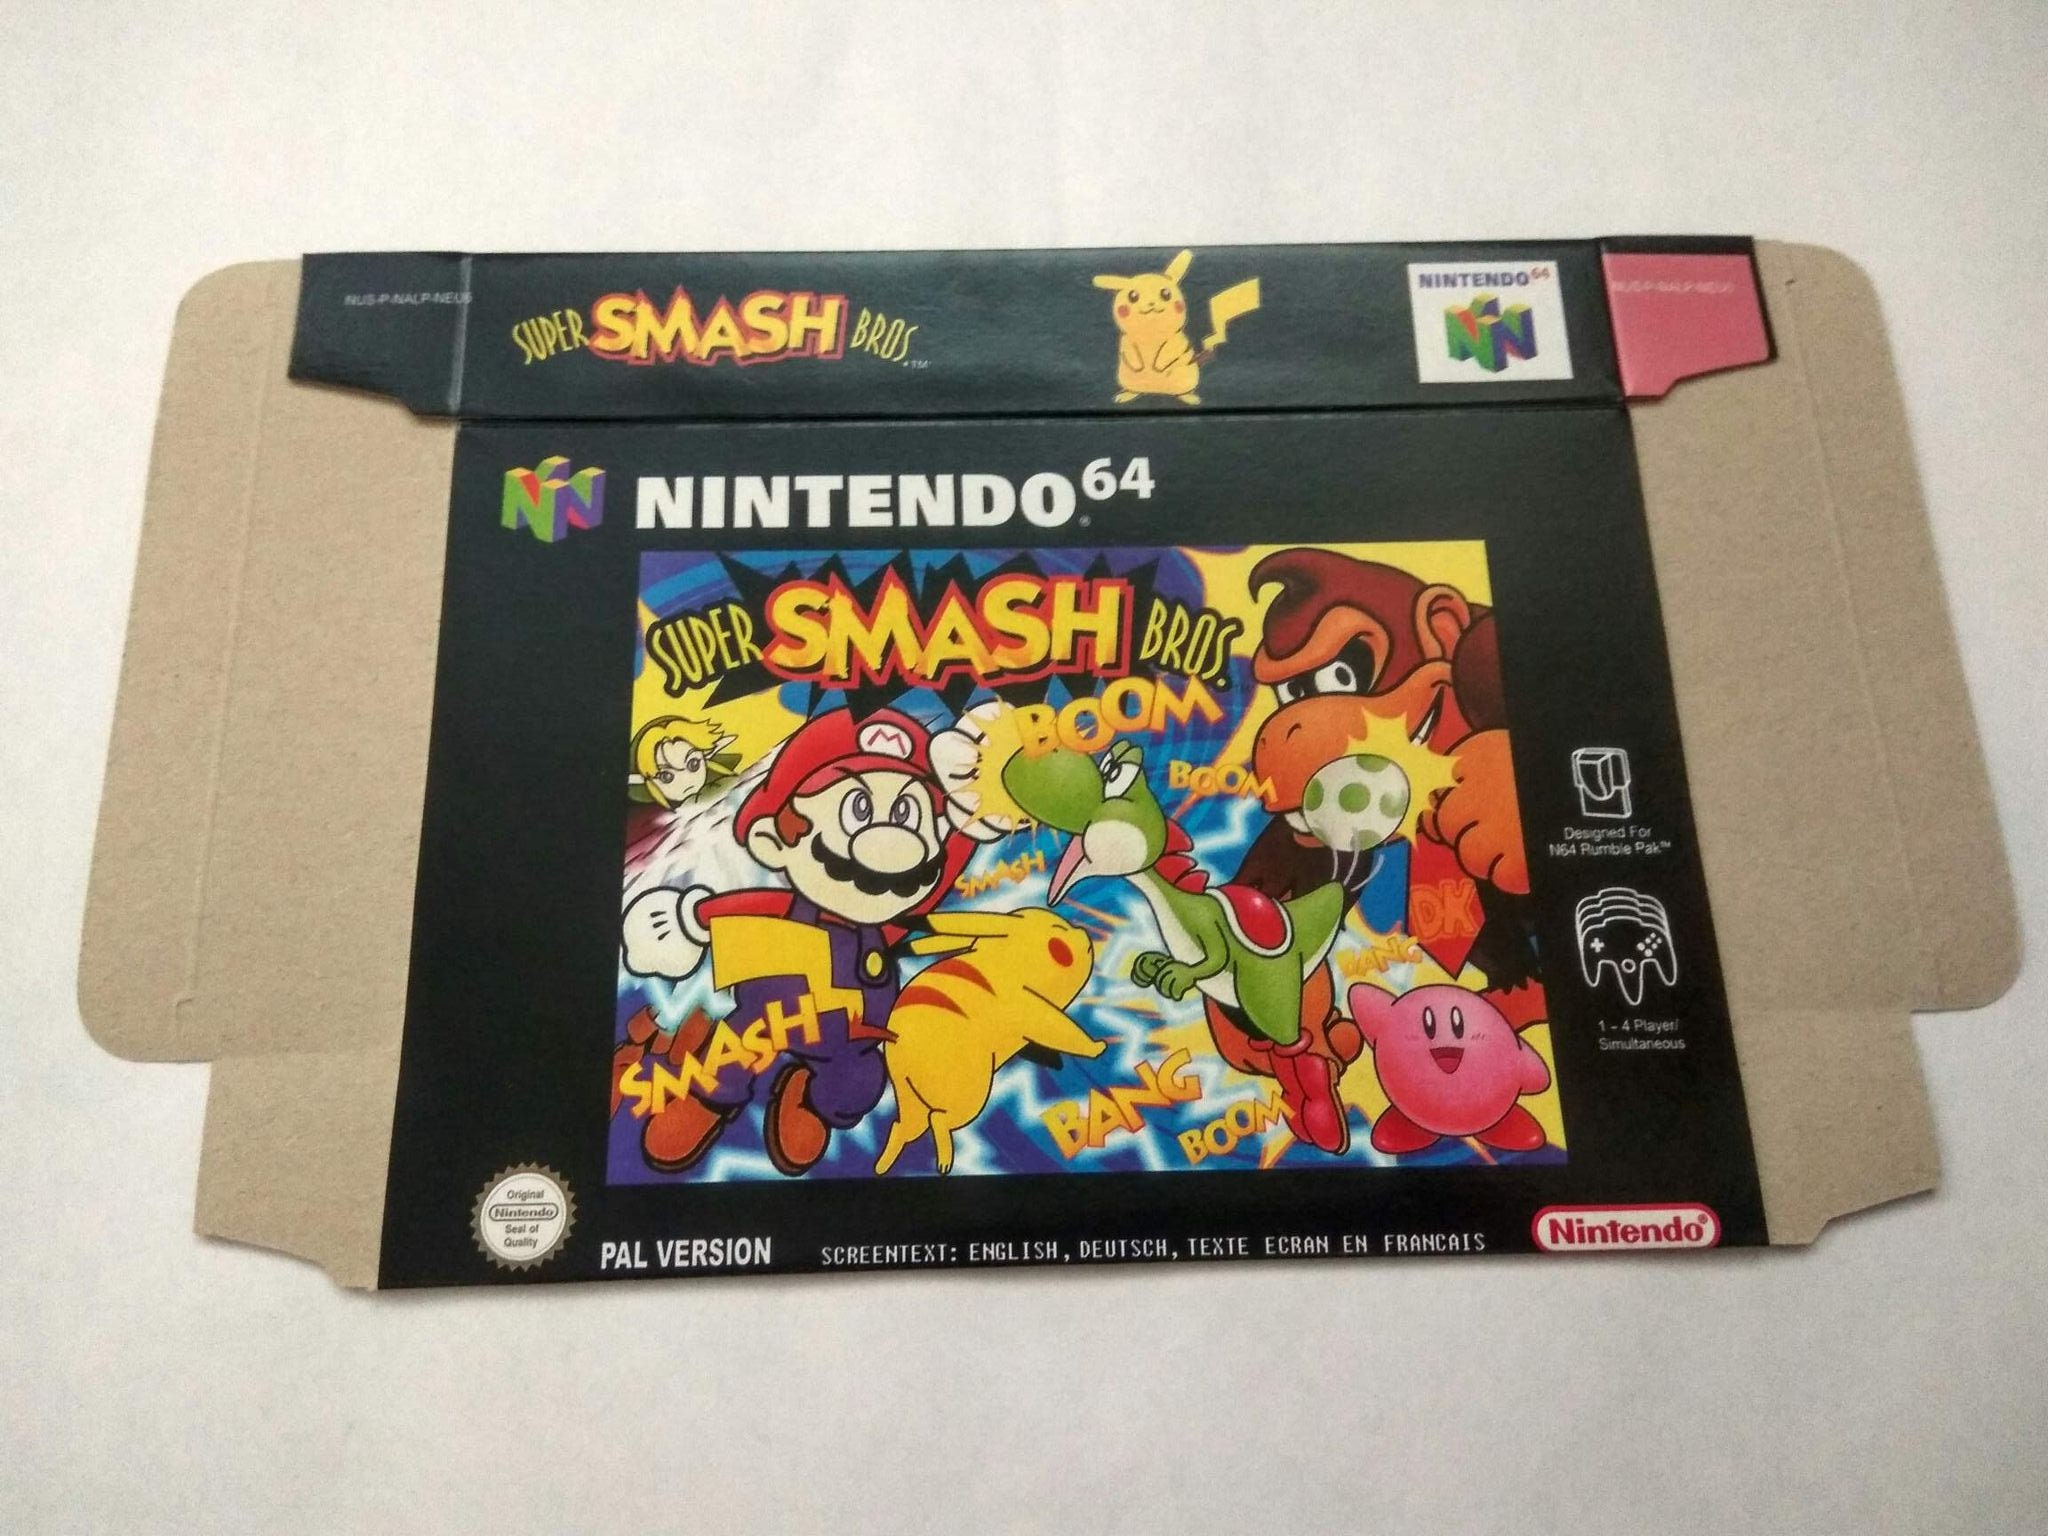 Super Smash Bros. Complete in Box NICE! - Nintendo 64 N64 **TESTED &  AUTHENTIC**